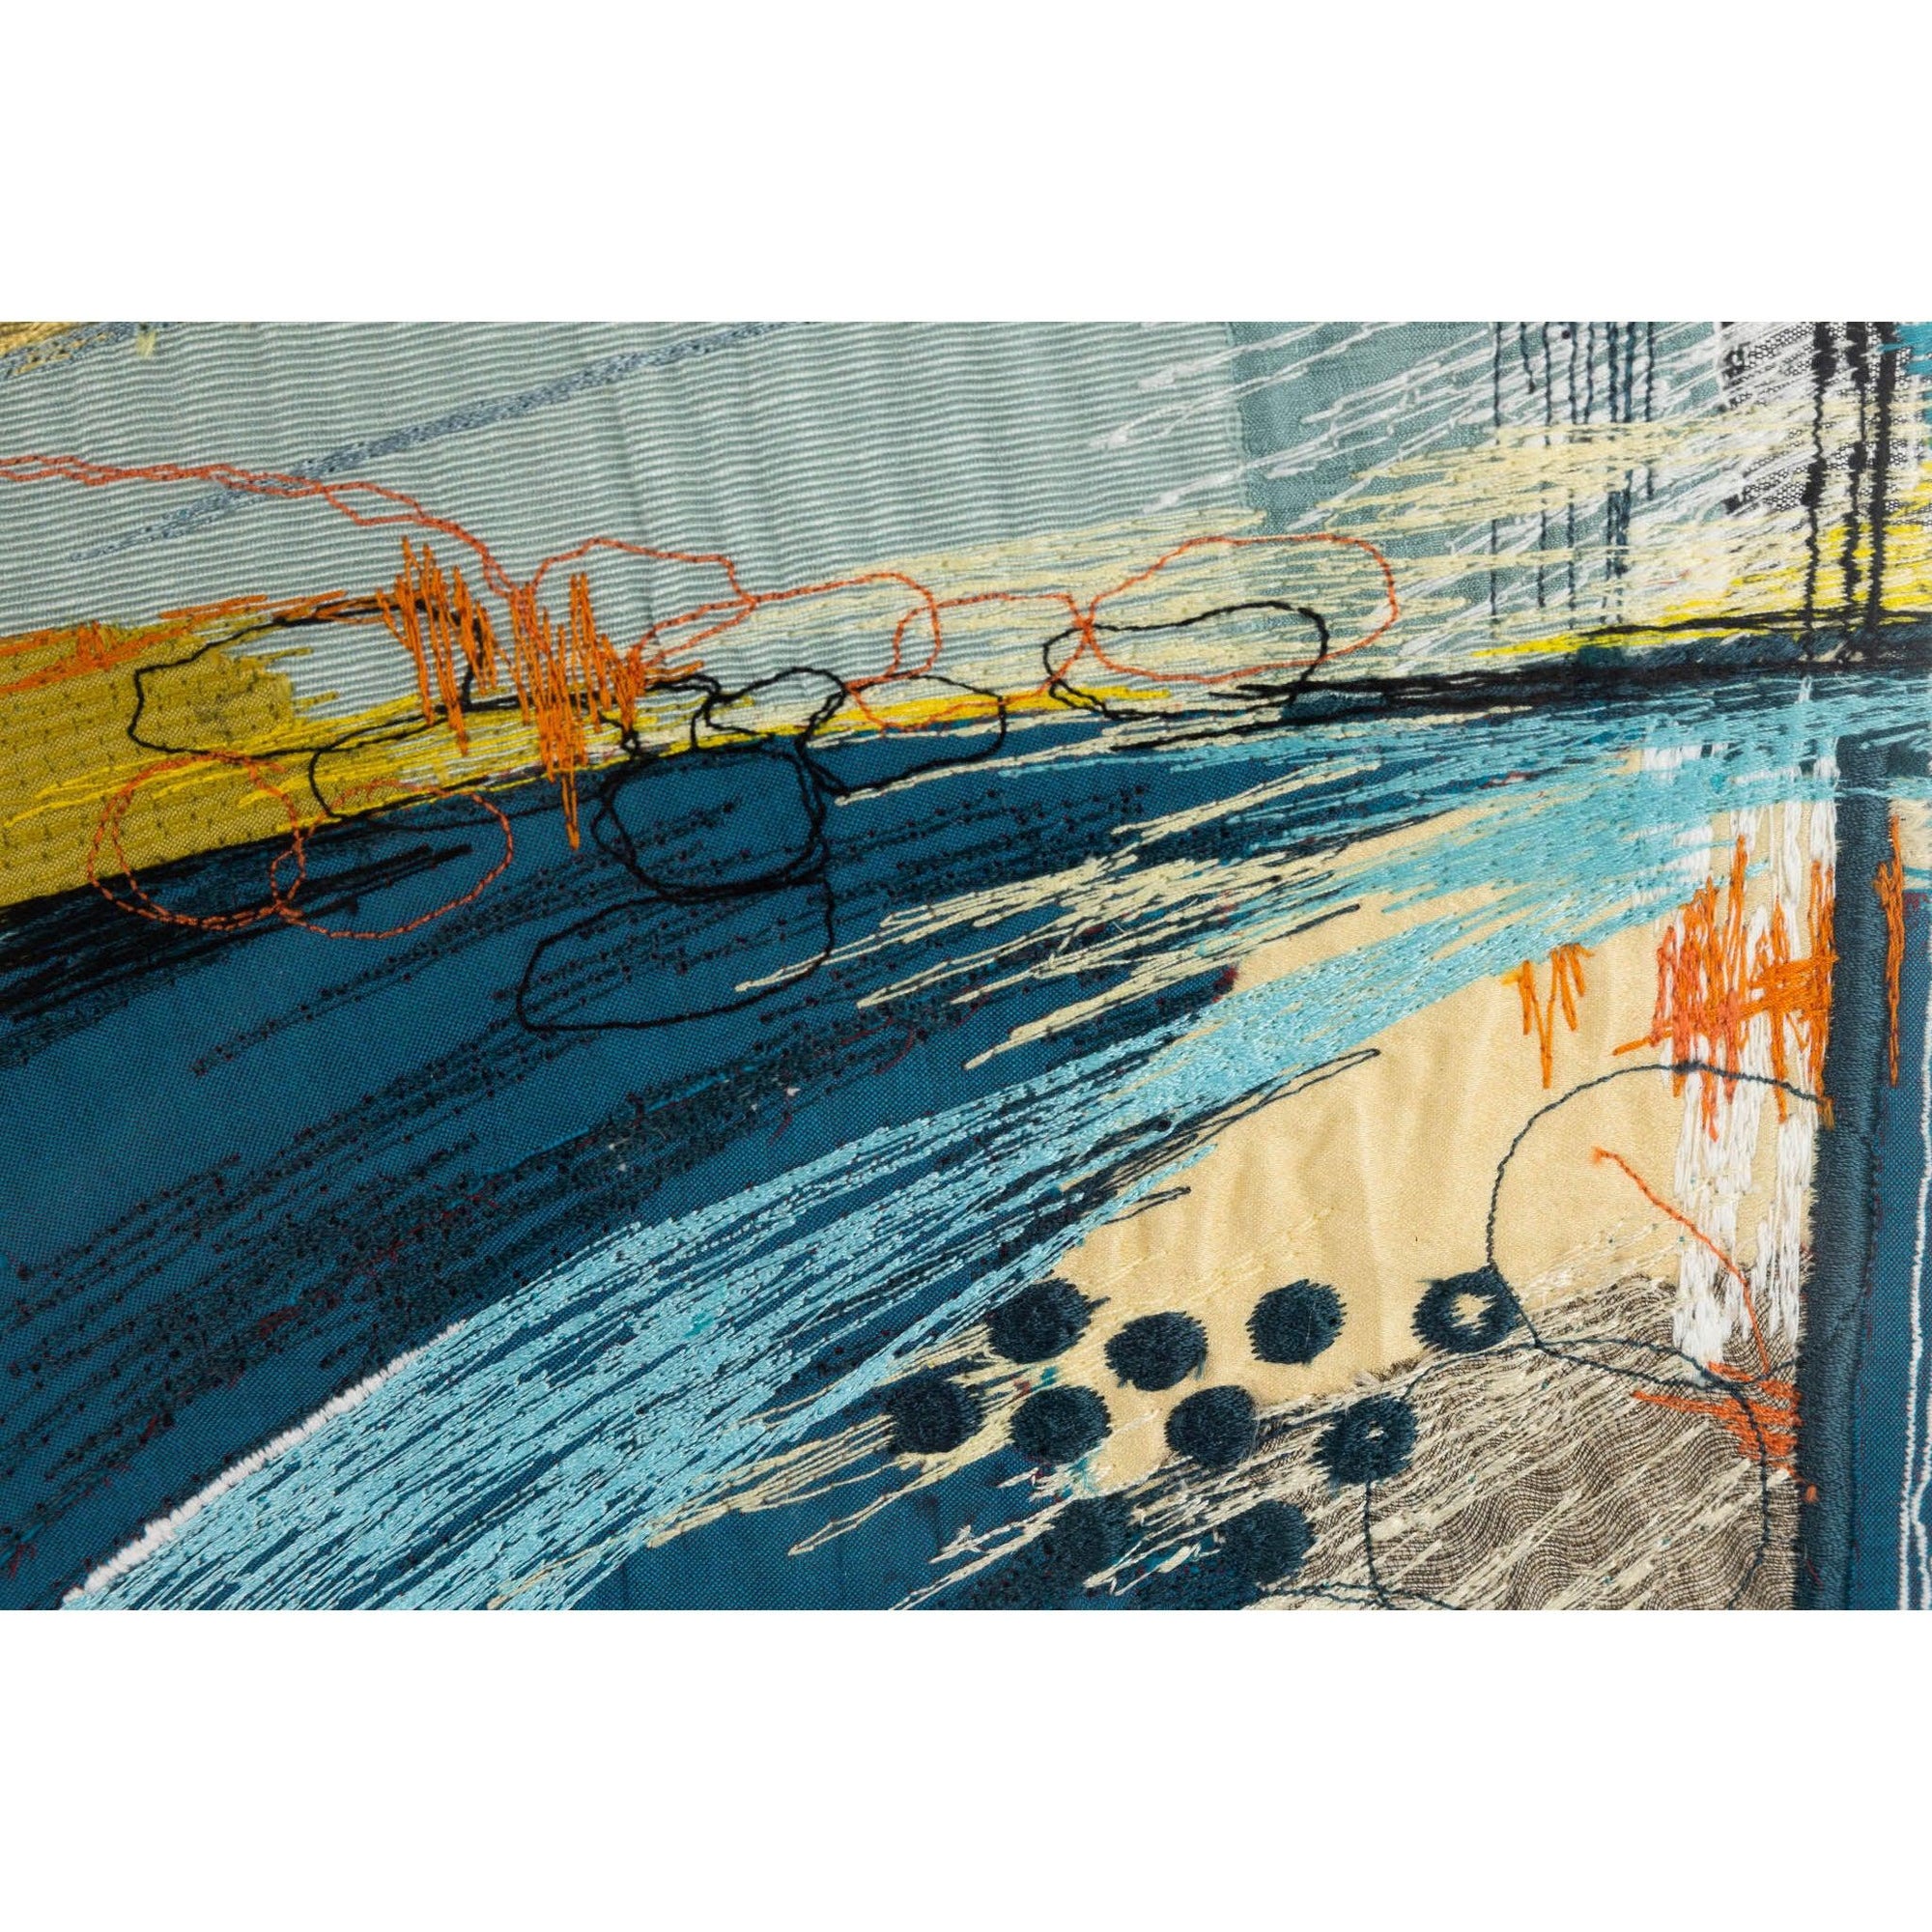 'Half a Yellow Sun' dynamic stitched textiles by Sarah Pooley, available at Padstow Gallery, Cornwall